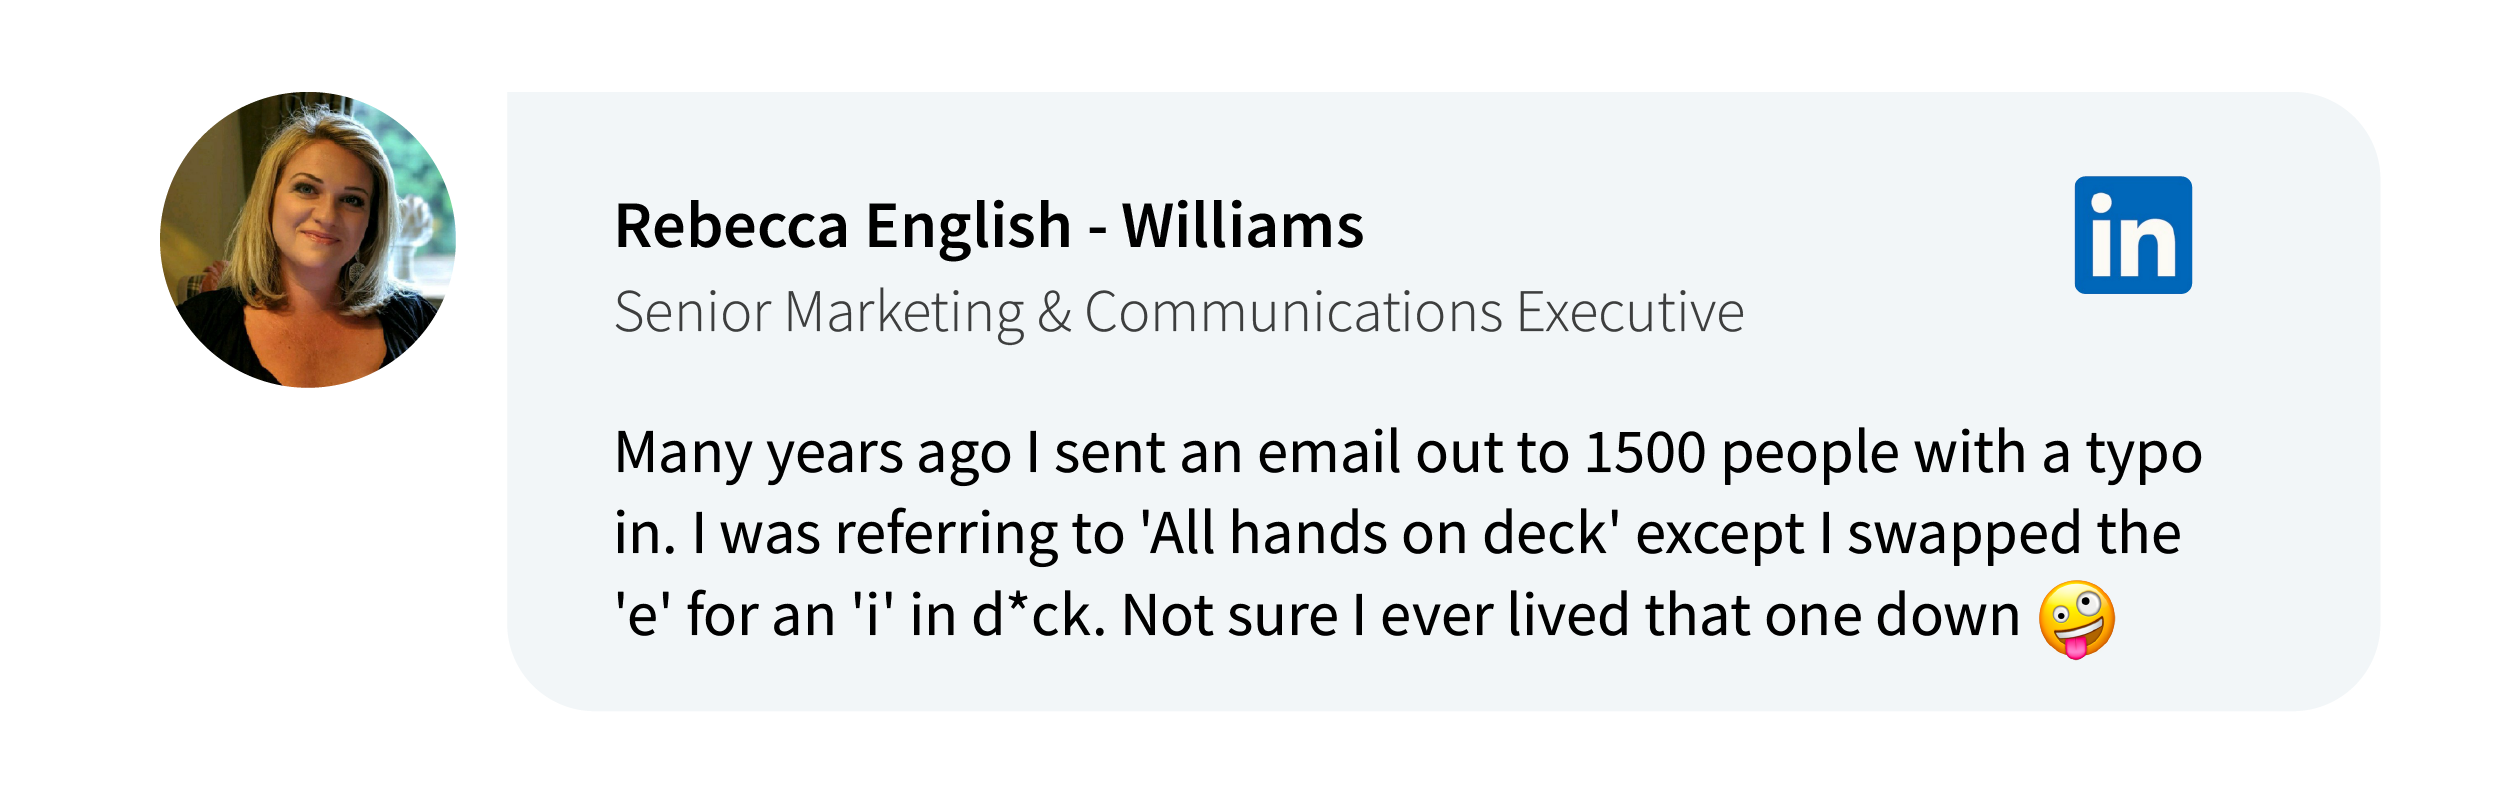 Rebecca English-Williams on LinkedIn: Many years ago I sent an email out to 1500 people with a typo in. I was referring to 'All hands on deck' except I swapped the 'e' for an 'i' in d*ck. Not sure I ever lived that one down  